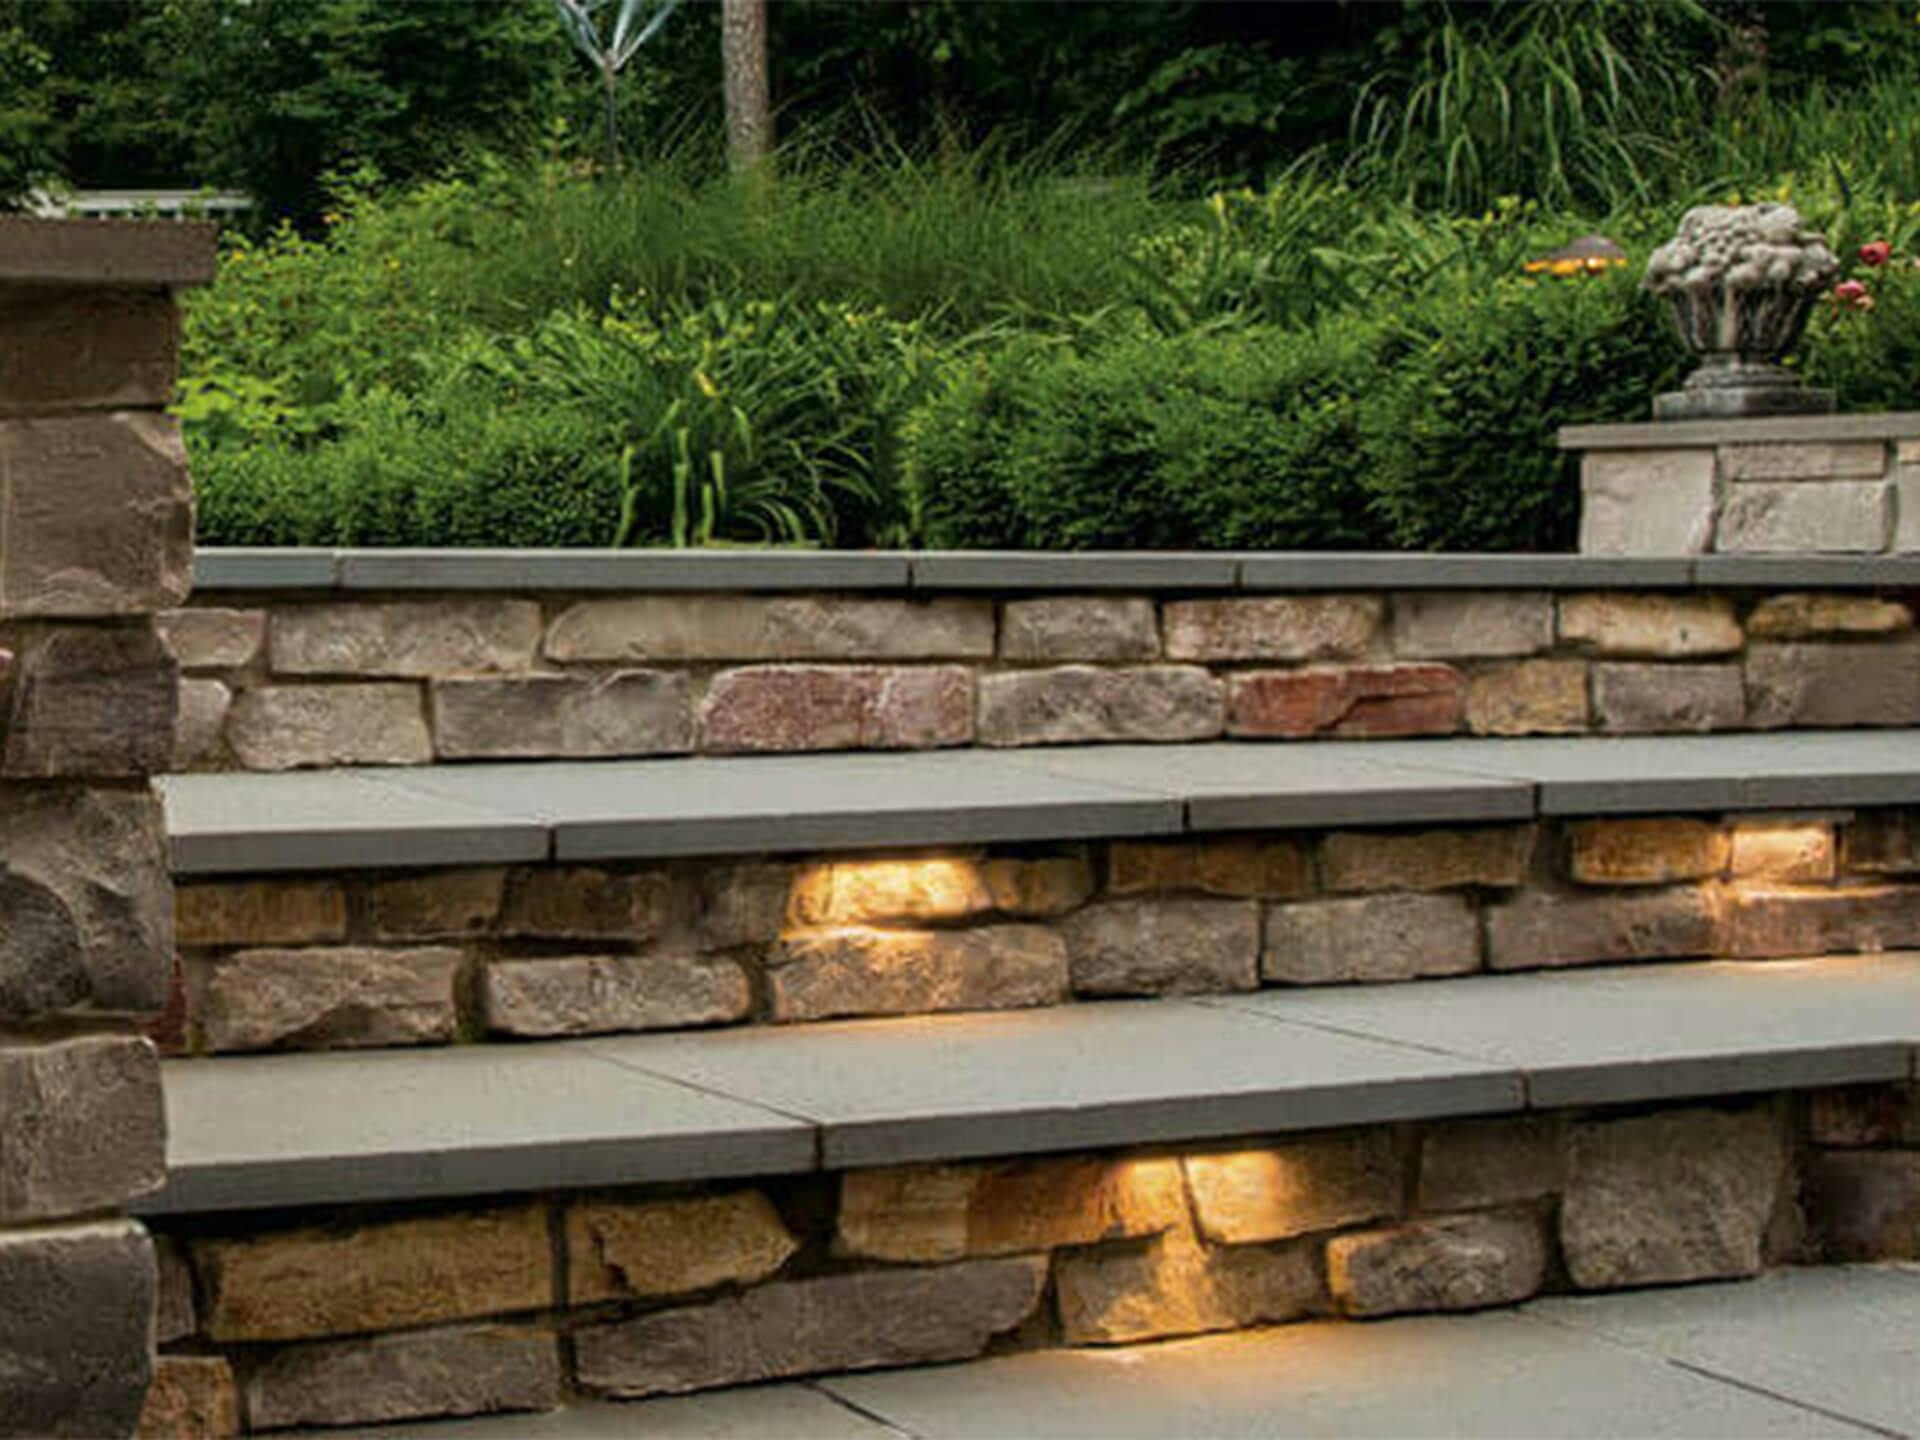 Outdoor stone steps with step lighting